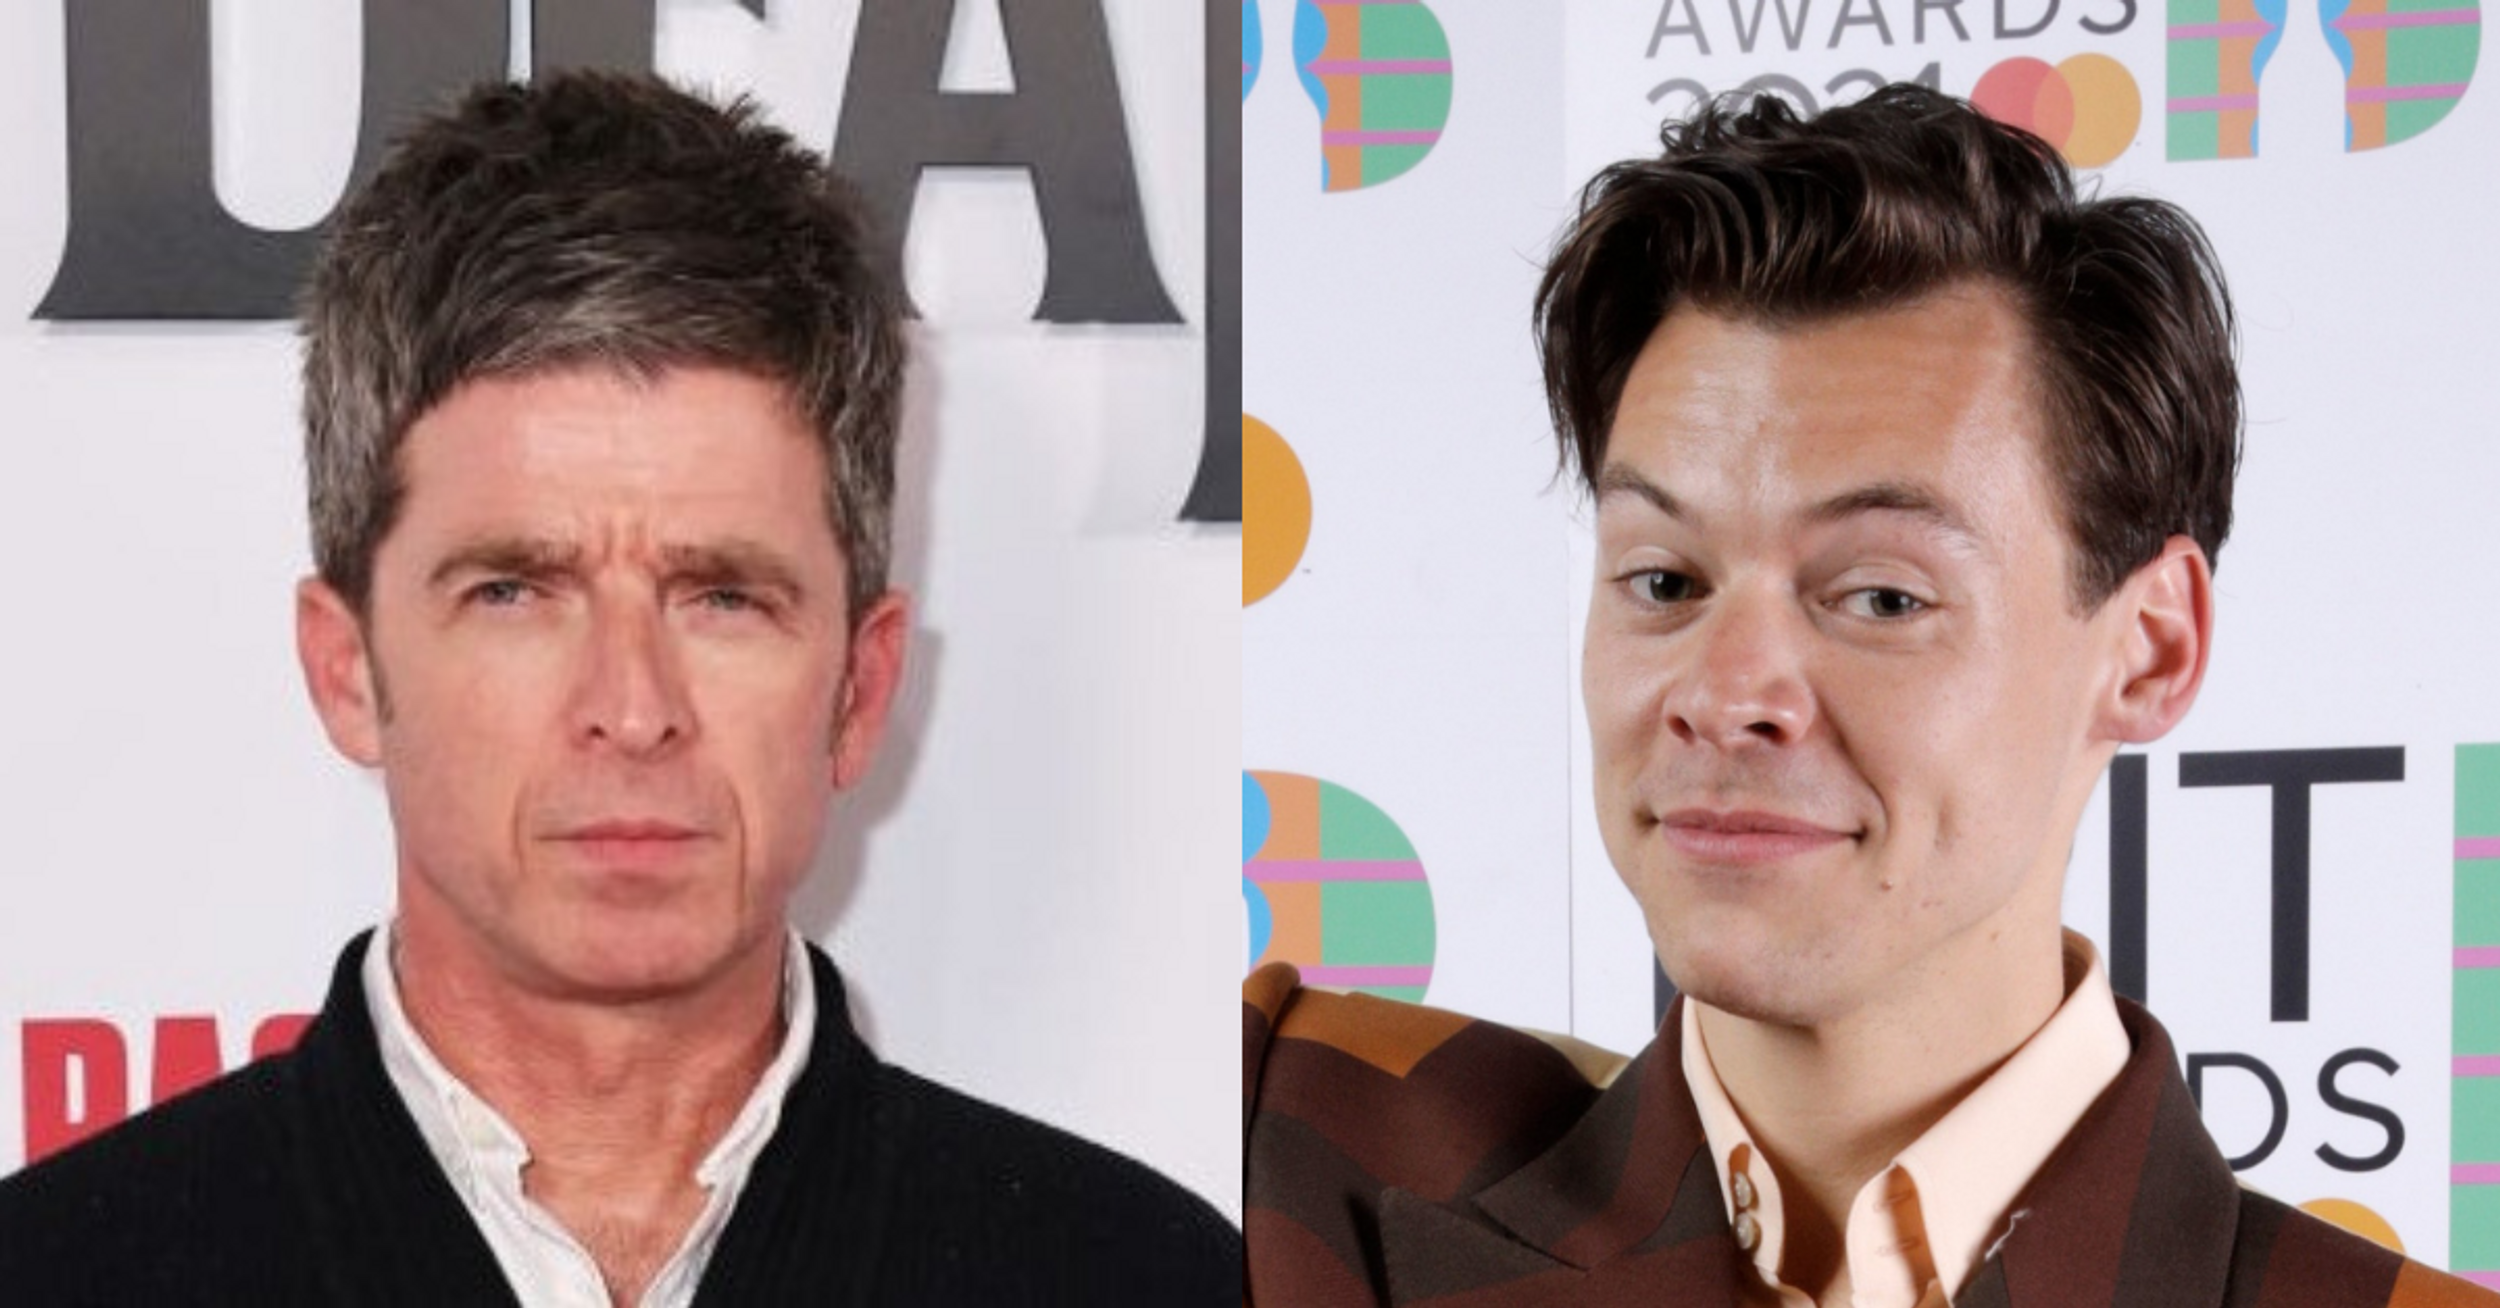 Noel Gallagher Slammed After Claiming 'Worthless' Harry Styles Isn't A 'Real Musician'